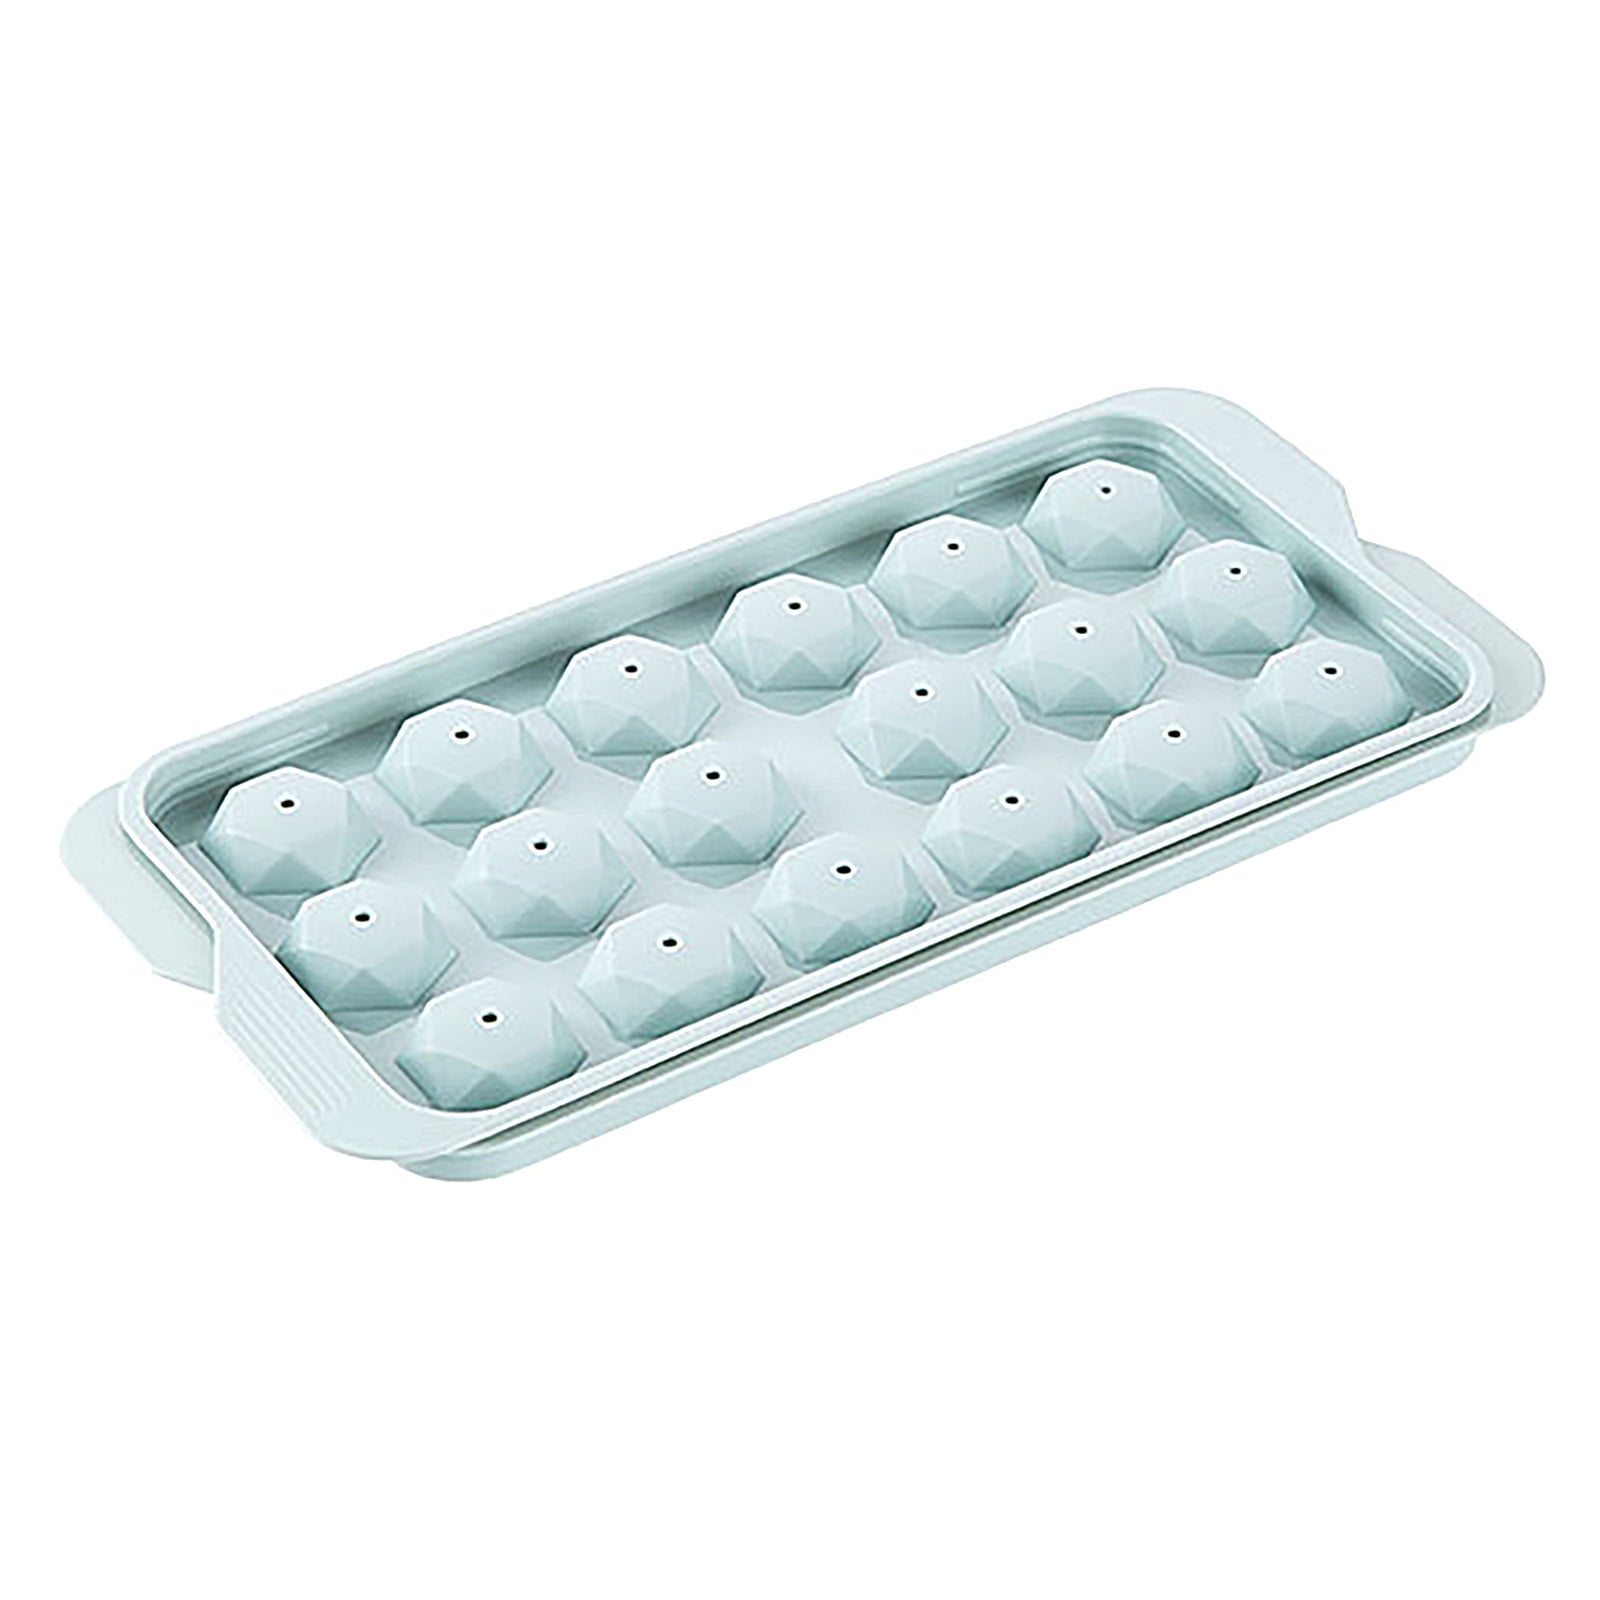  EOQPDECD 2 Mini Ice Cube Trays Round Ice Cube Tray with Lid &  Bin Ice Ball Maker Mold for Freezer with Container Mini Circle Ice Cube Tray  Making 33PCS Sphere Ice